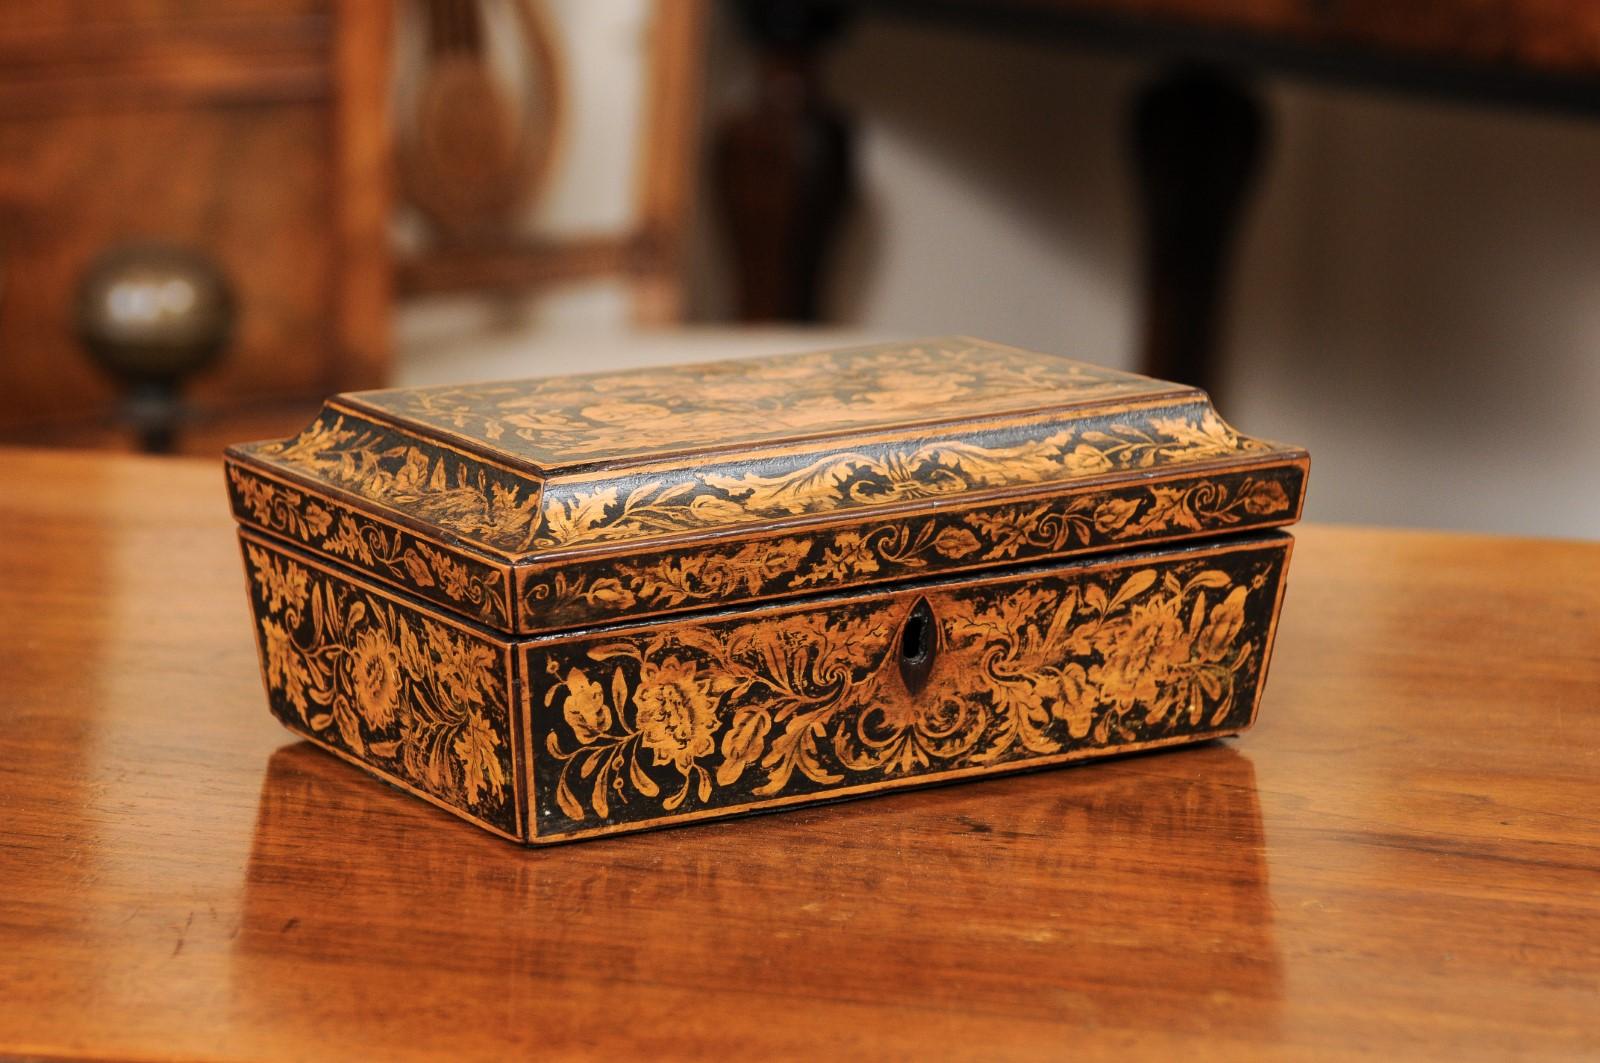 Early 19th century English Regency penwork box featuring two ladies sitting at leisure and stylized foliage design throughout. The interior lined with paper.

 